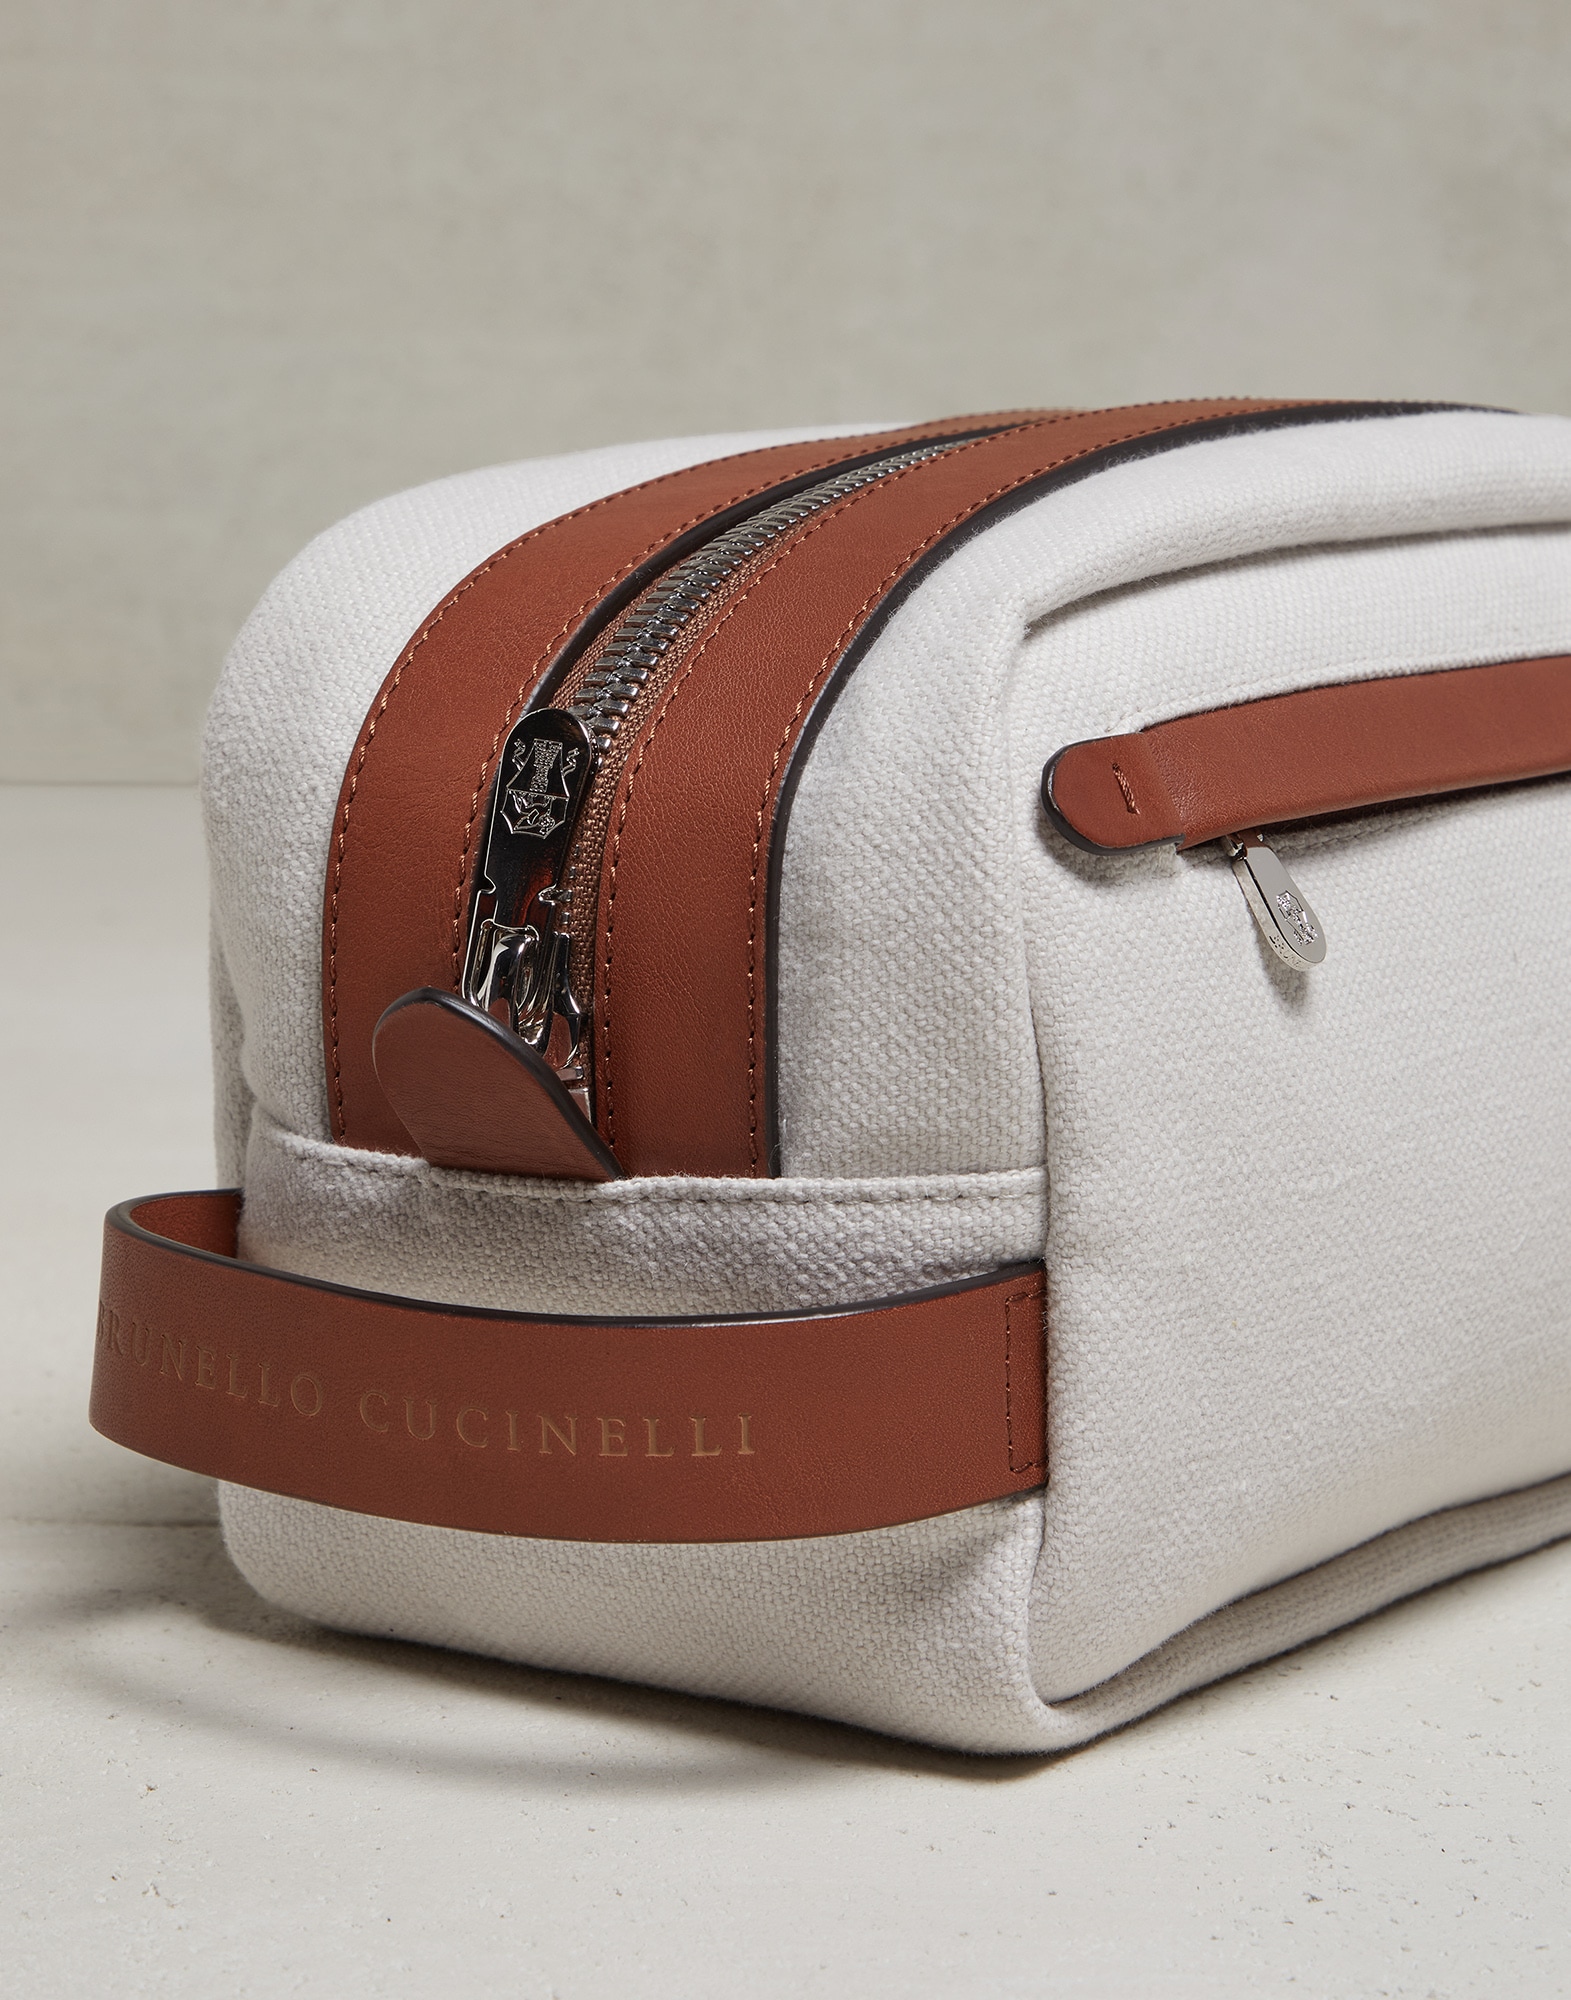 Men's wallets and small leather goods | Brunello Cucinelli